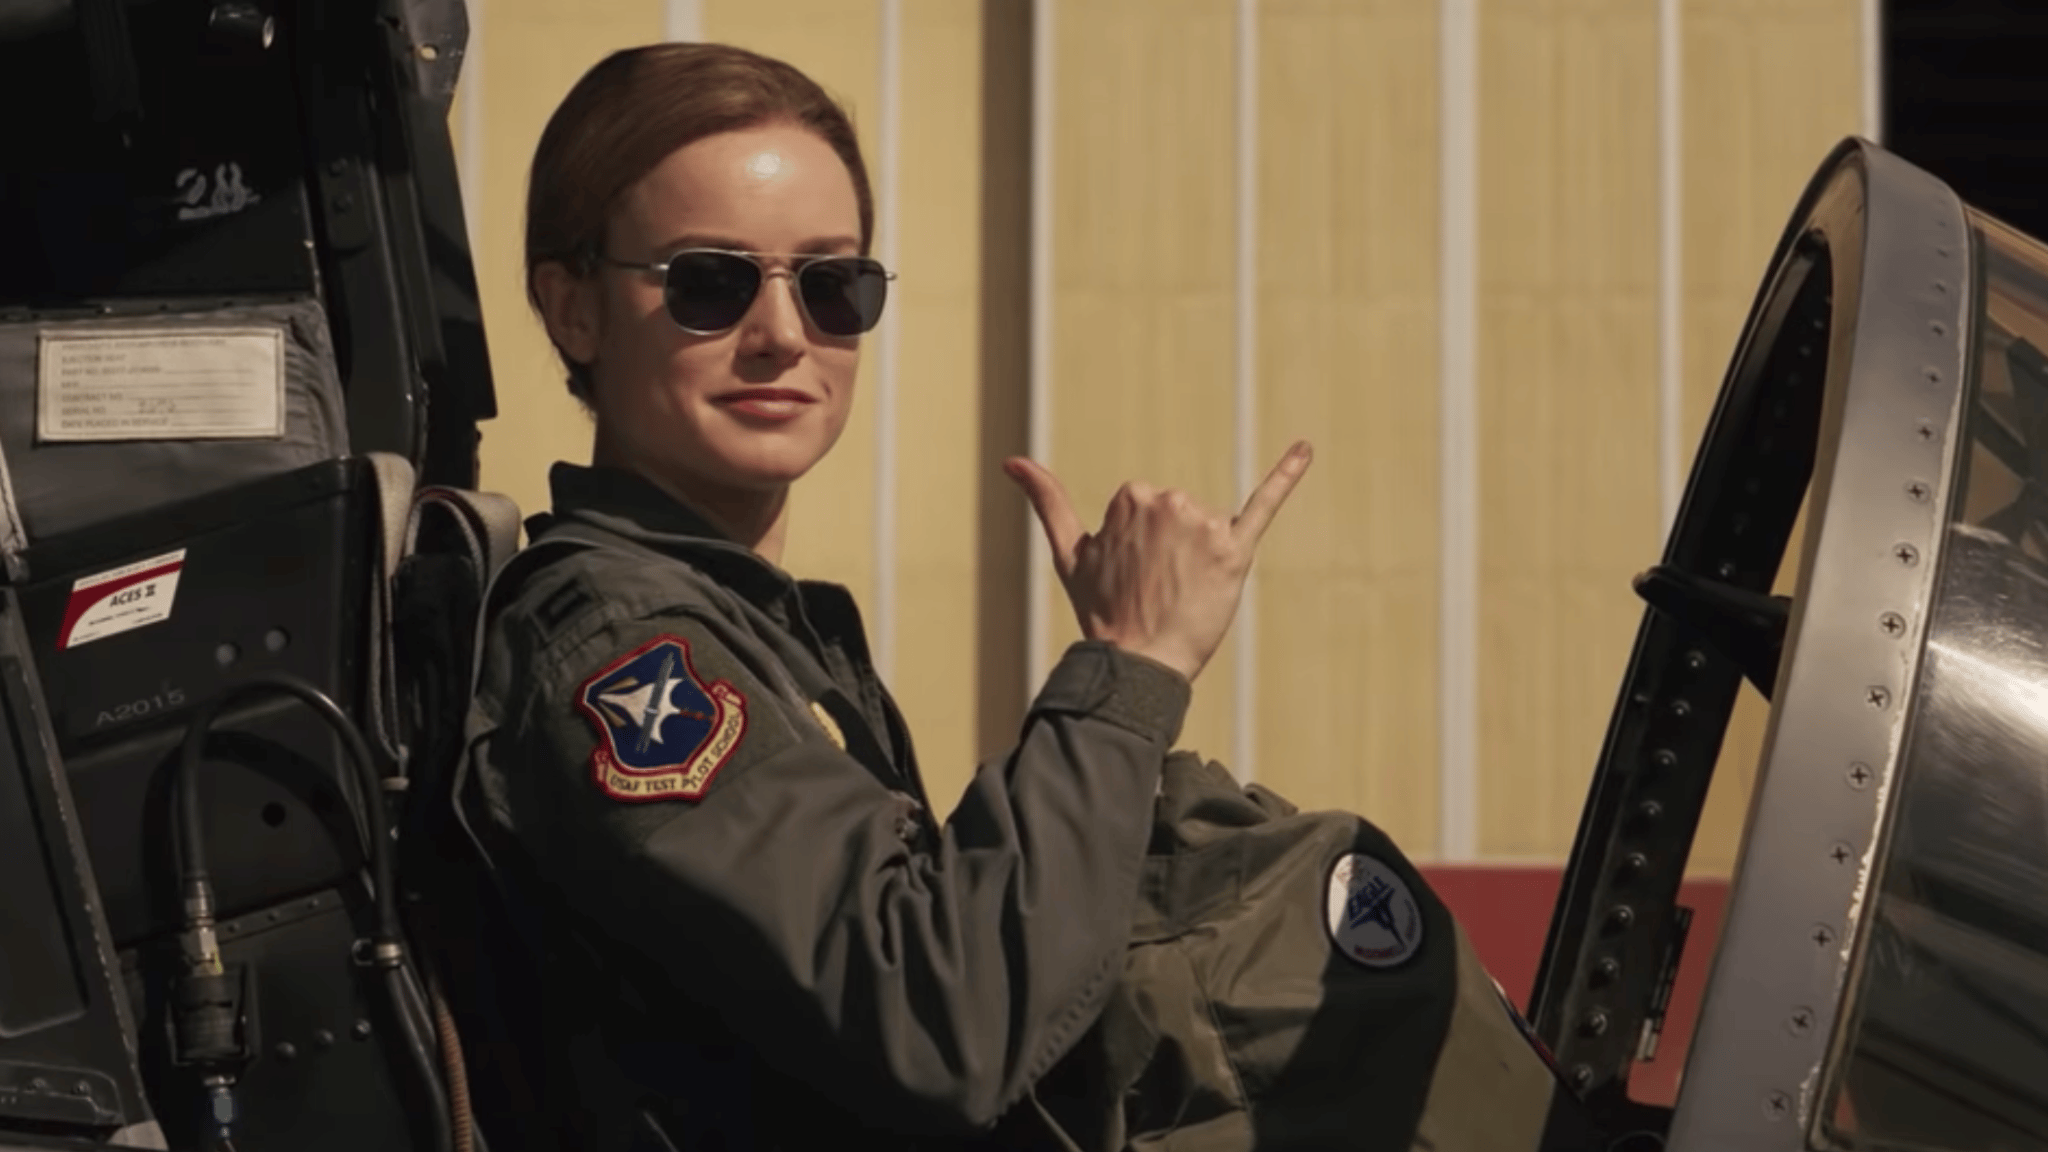 Brie Larson's first outing as Captain Marvel in the MCU made $1.128 billion world-wide.